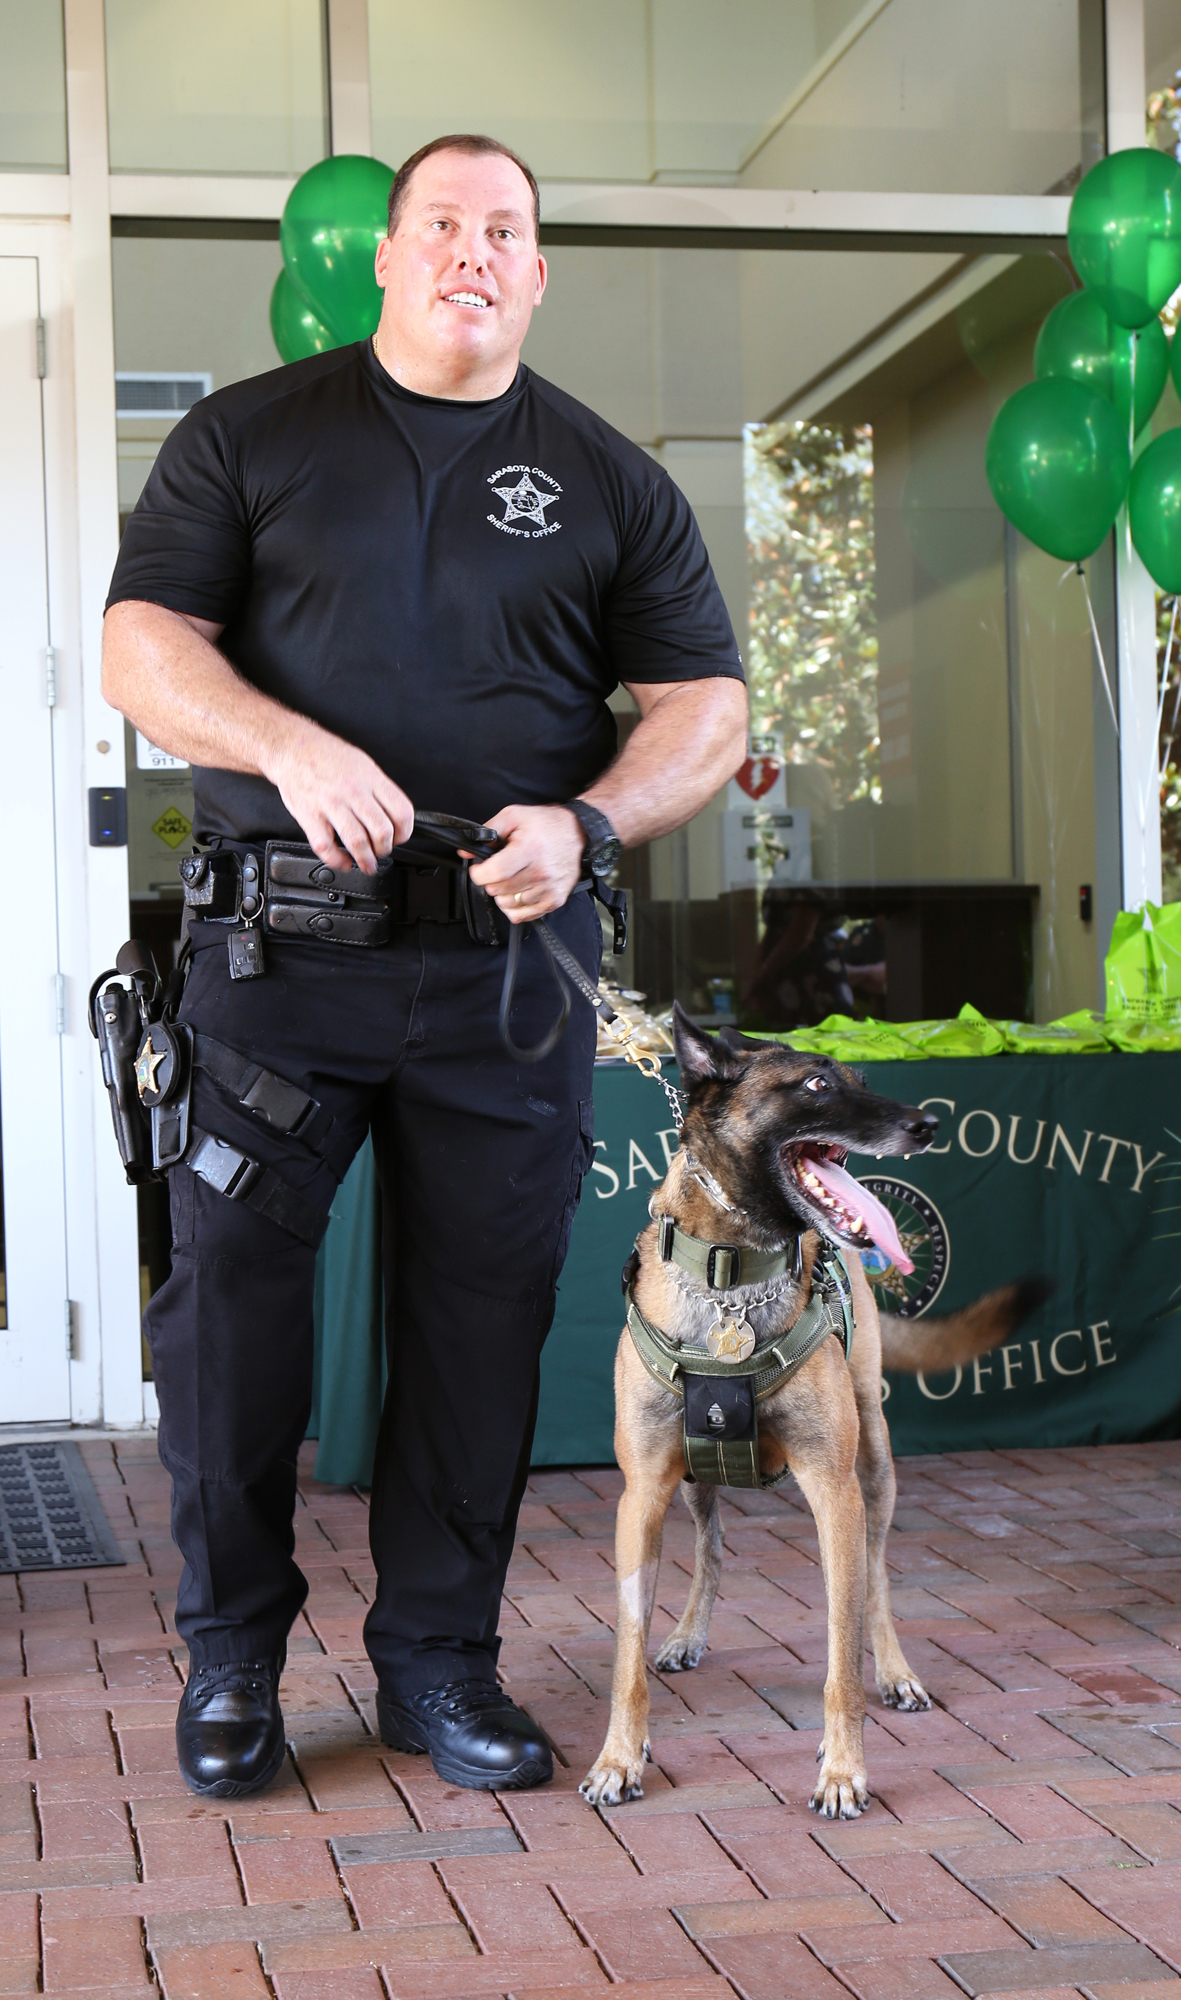 Deputy Chris Indico and K9 Bryx won first place in the 